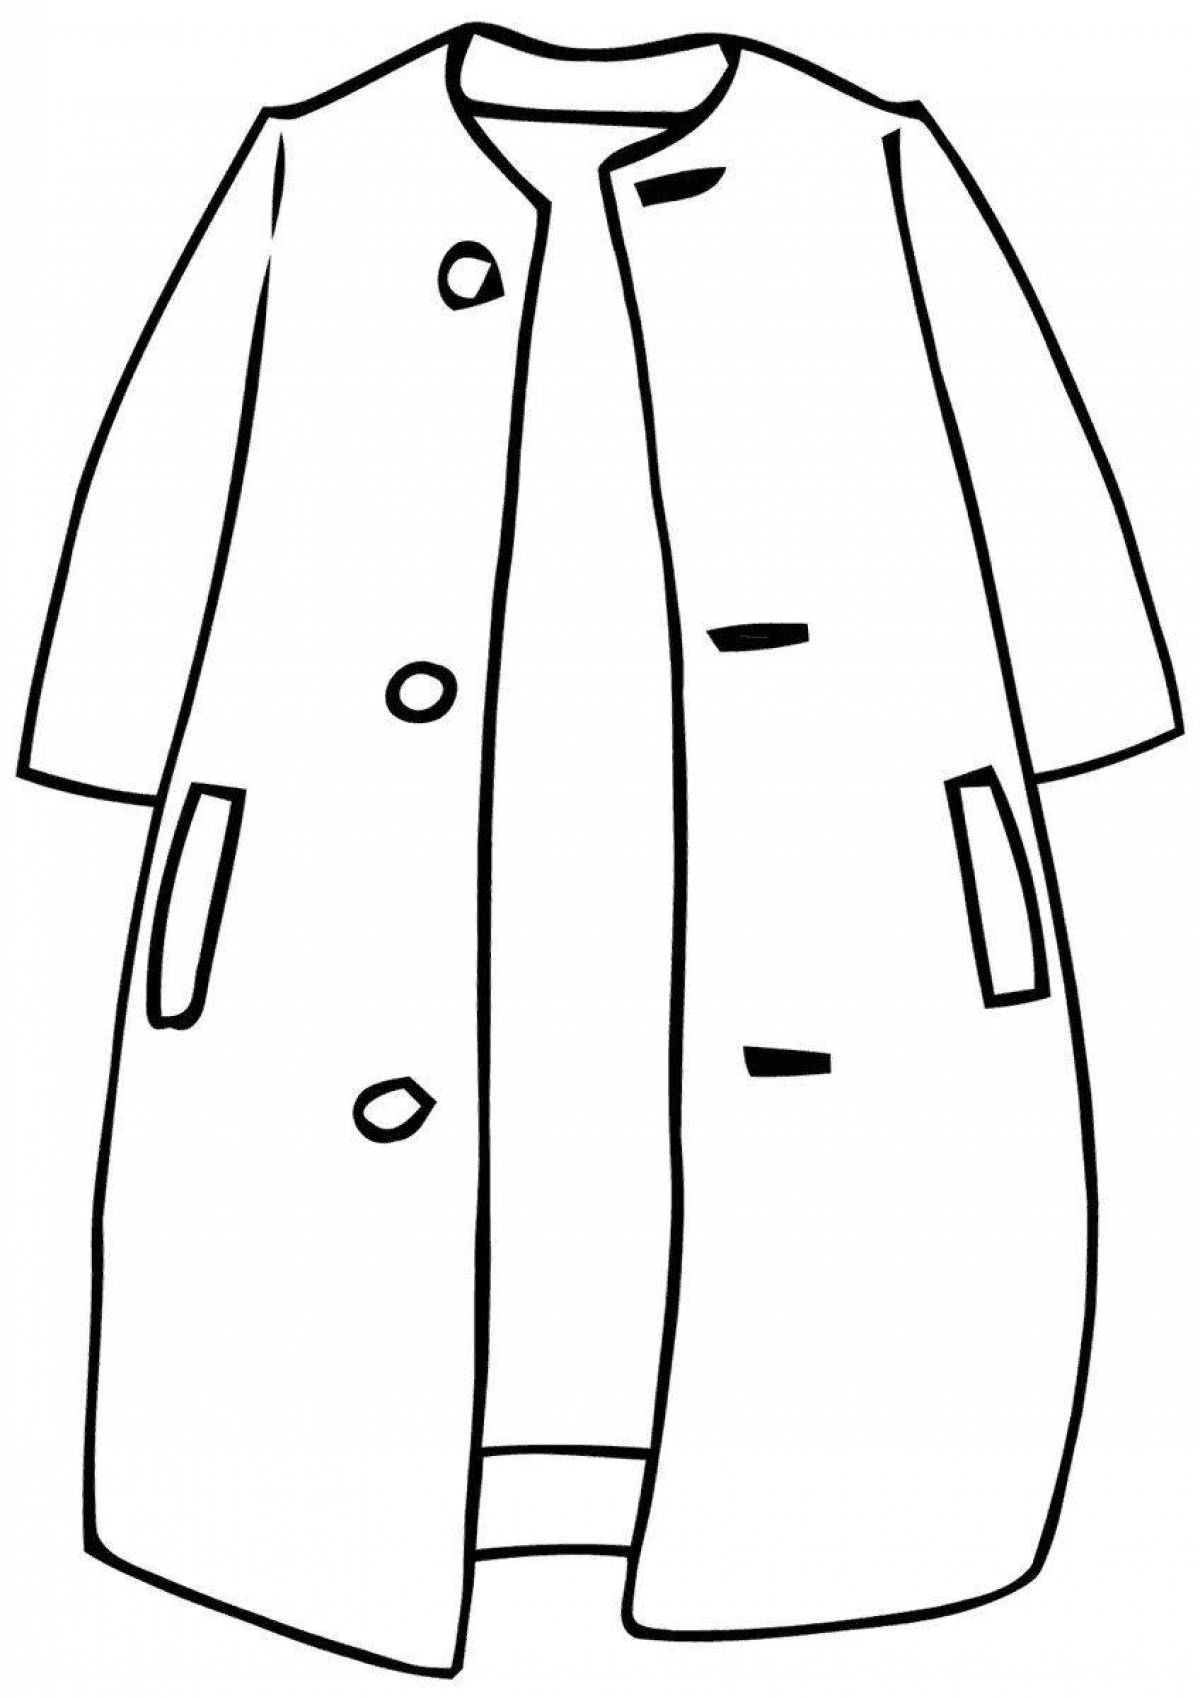 Coloring page funny raincoat for kids